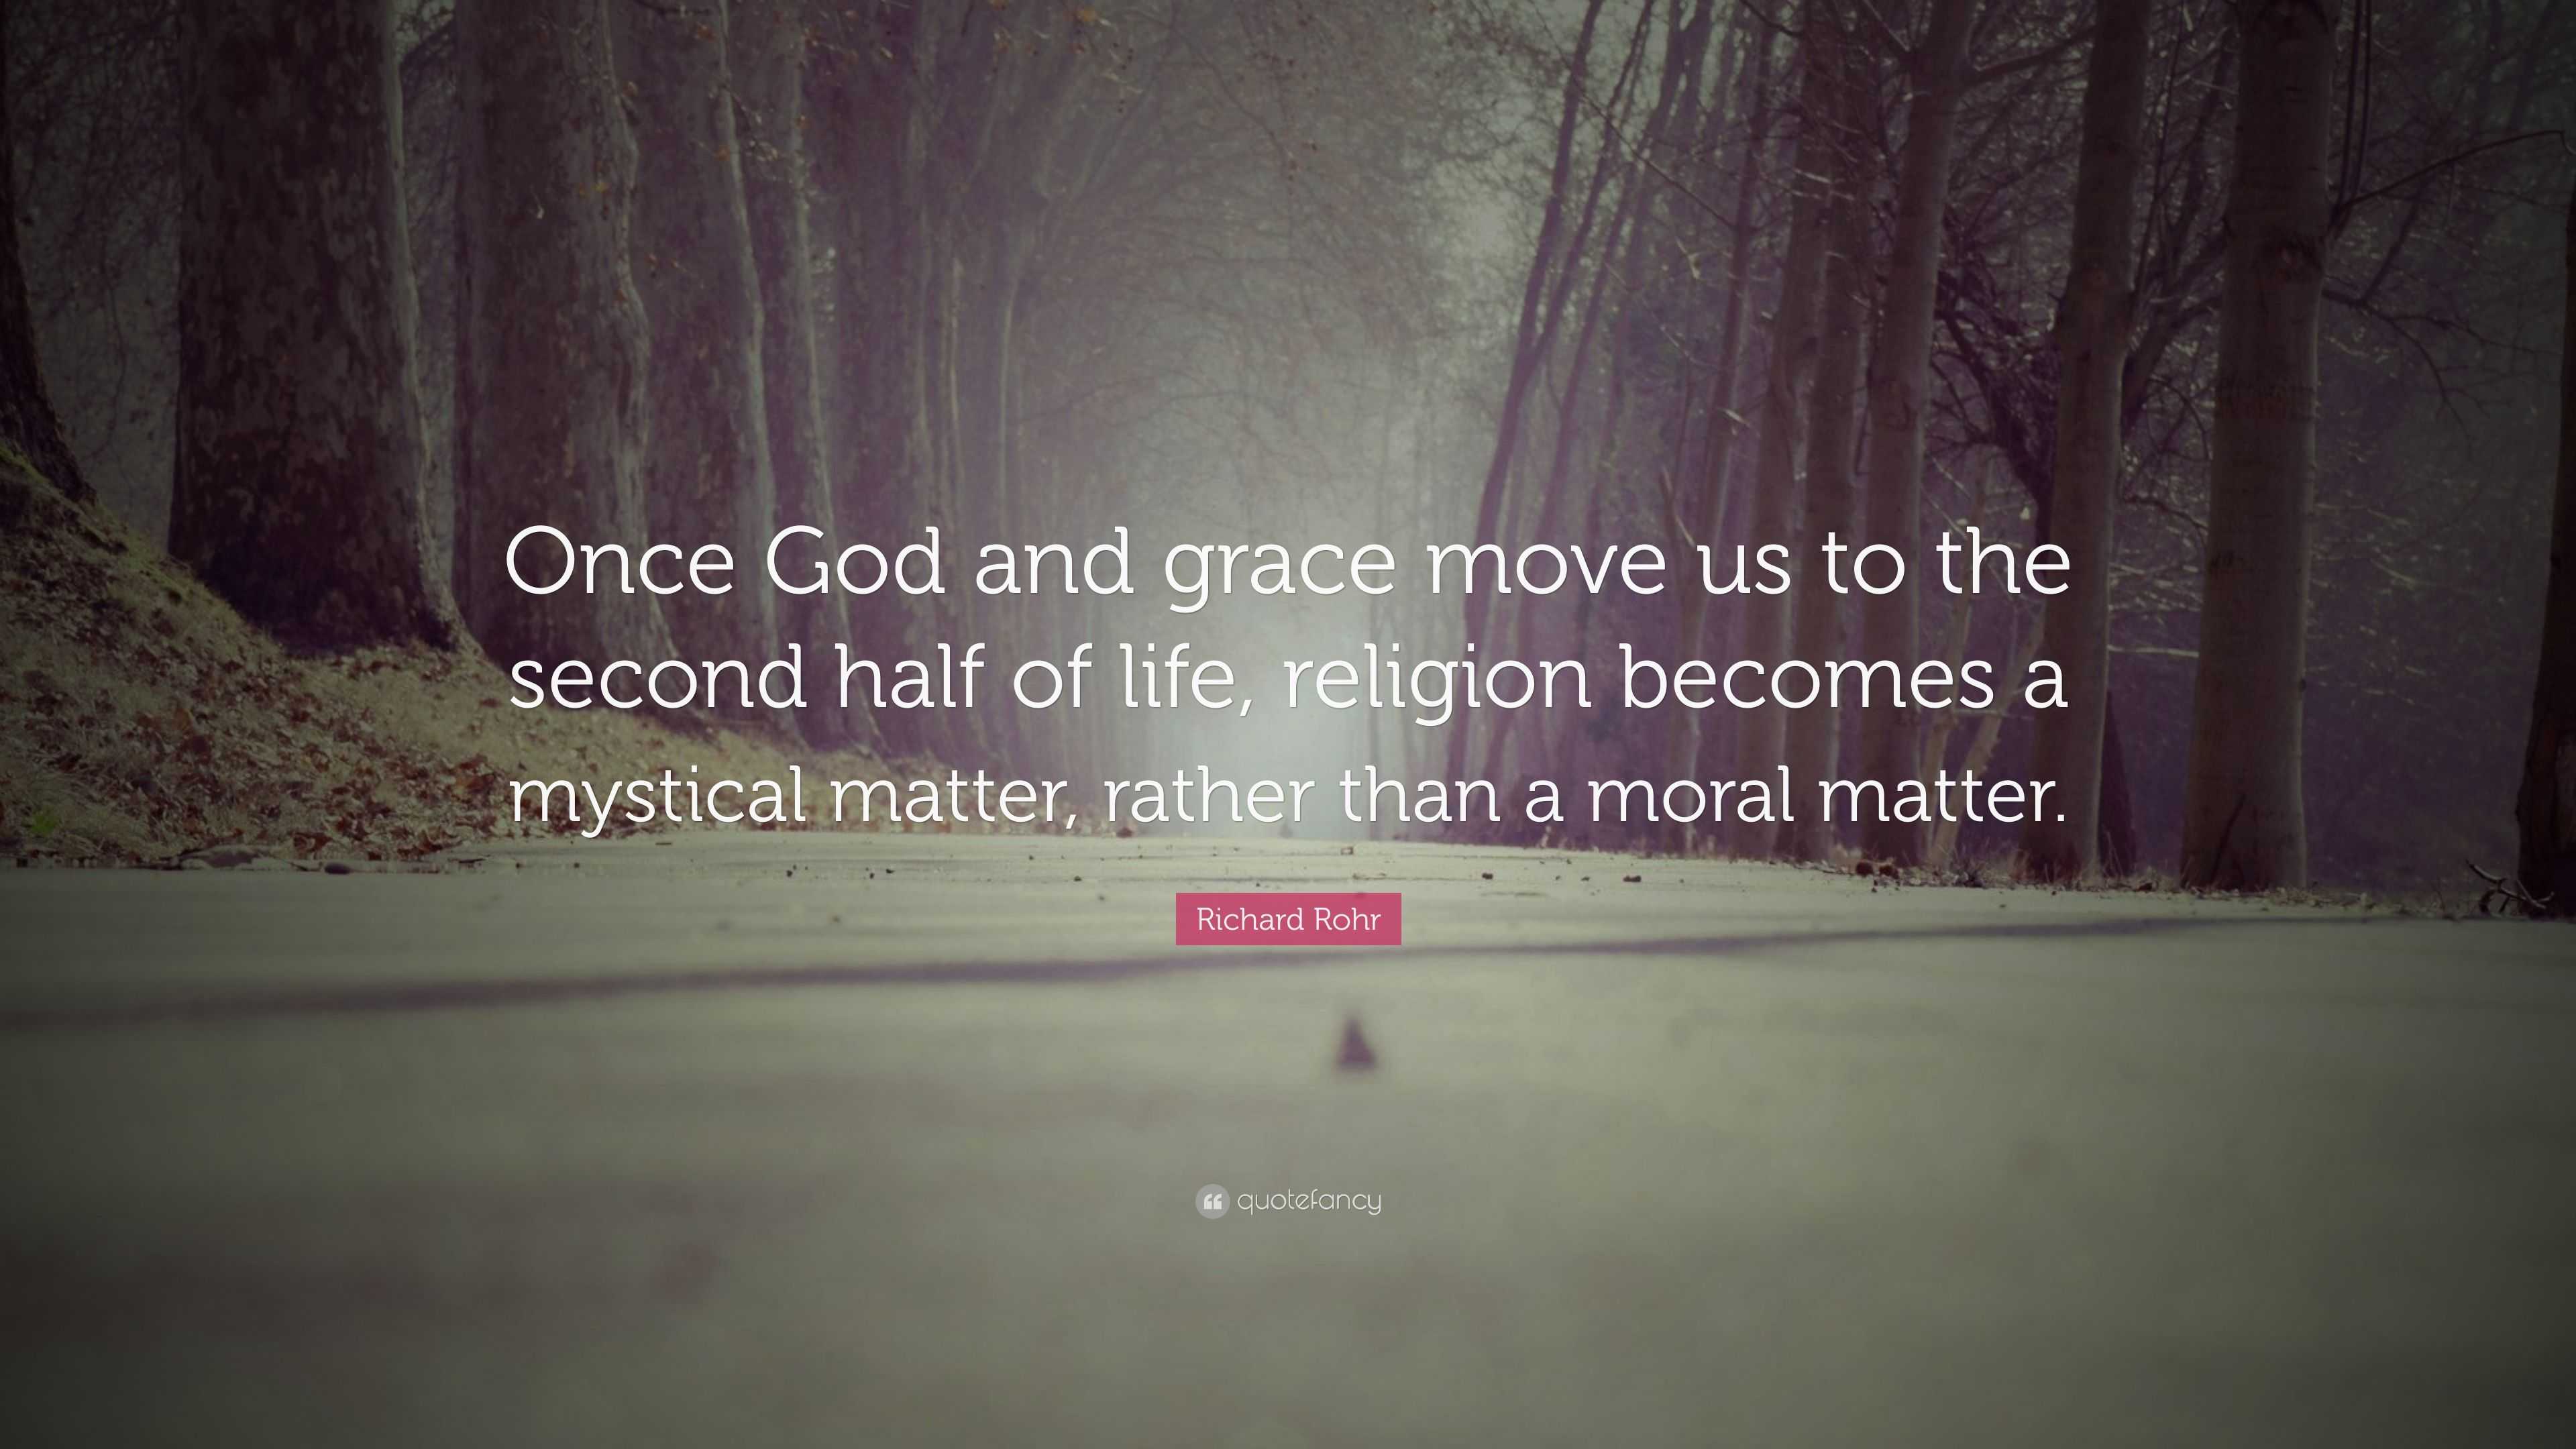 2257943 Richard Rohr Quote Once God and grace move us to the second half